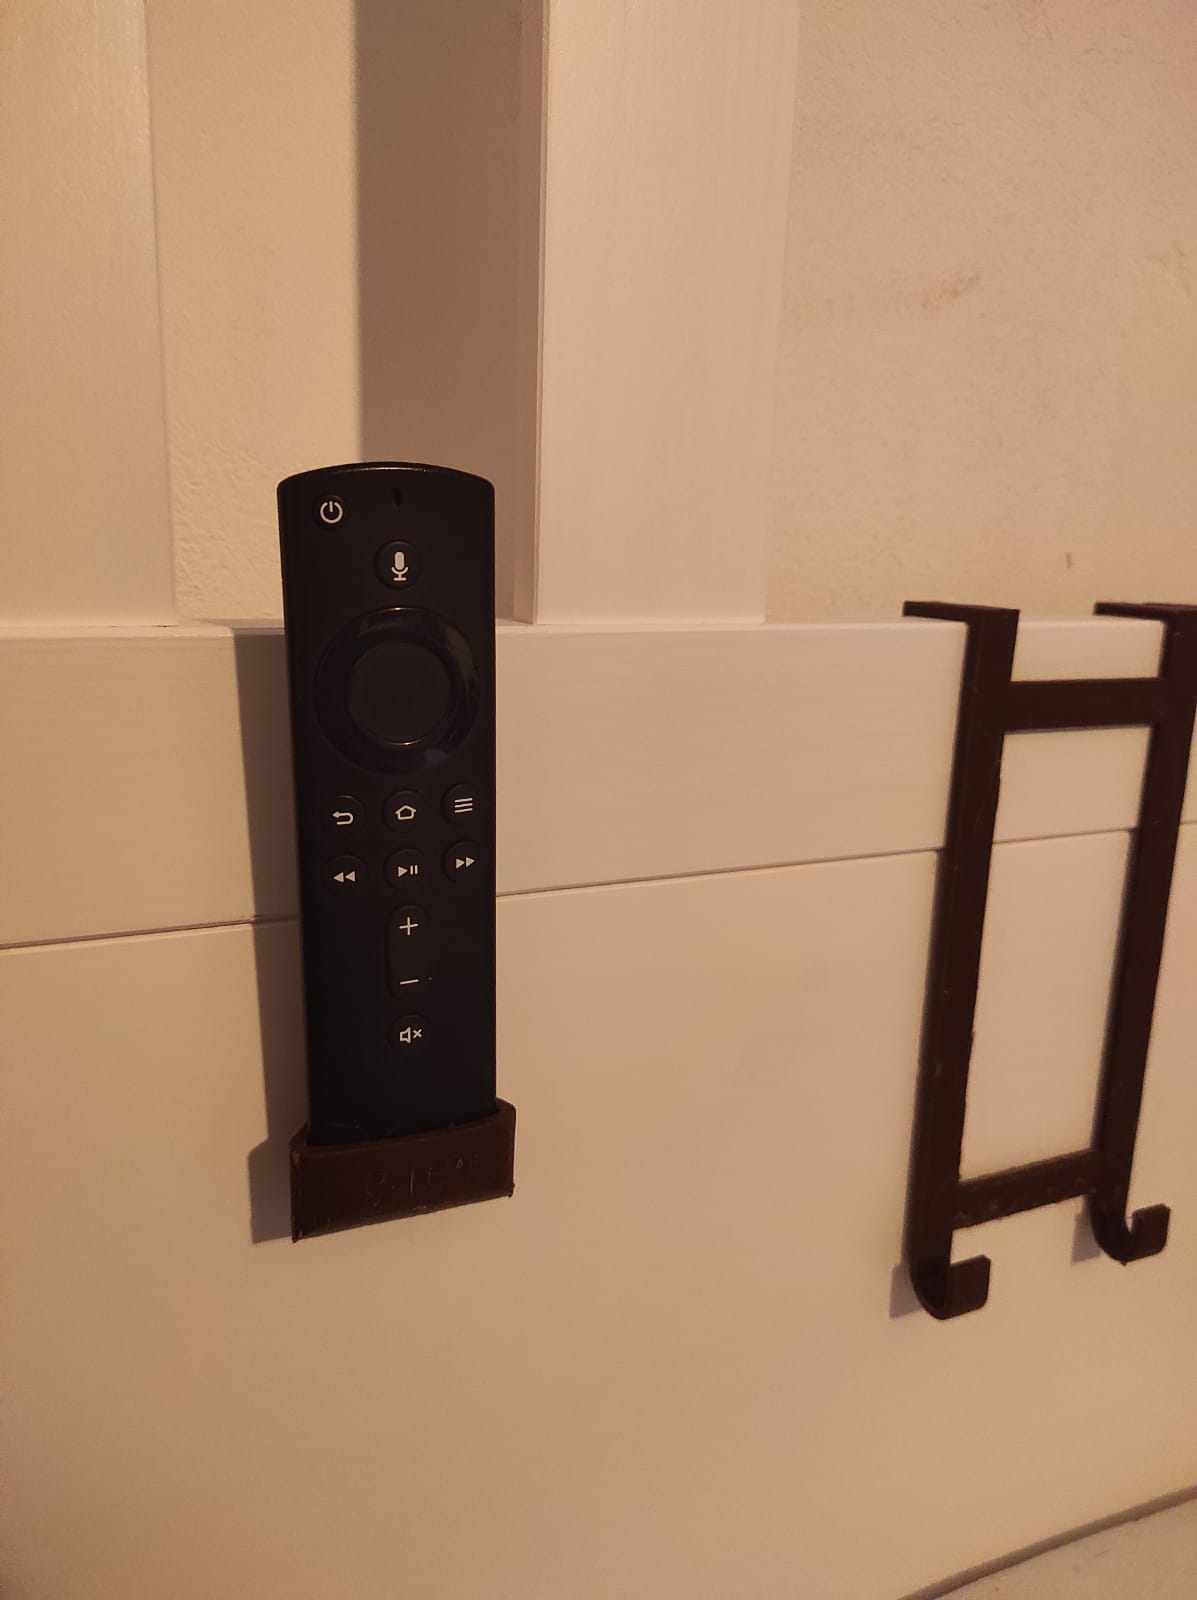 Fire tv remote holder for Ikea Hemnes bed